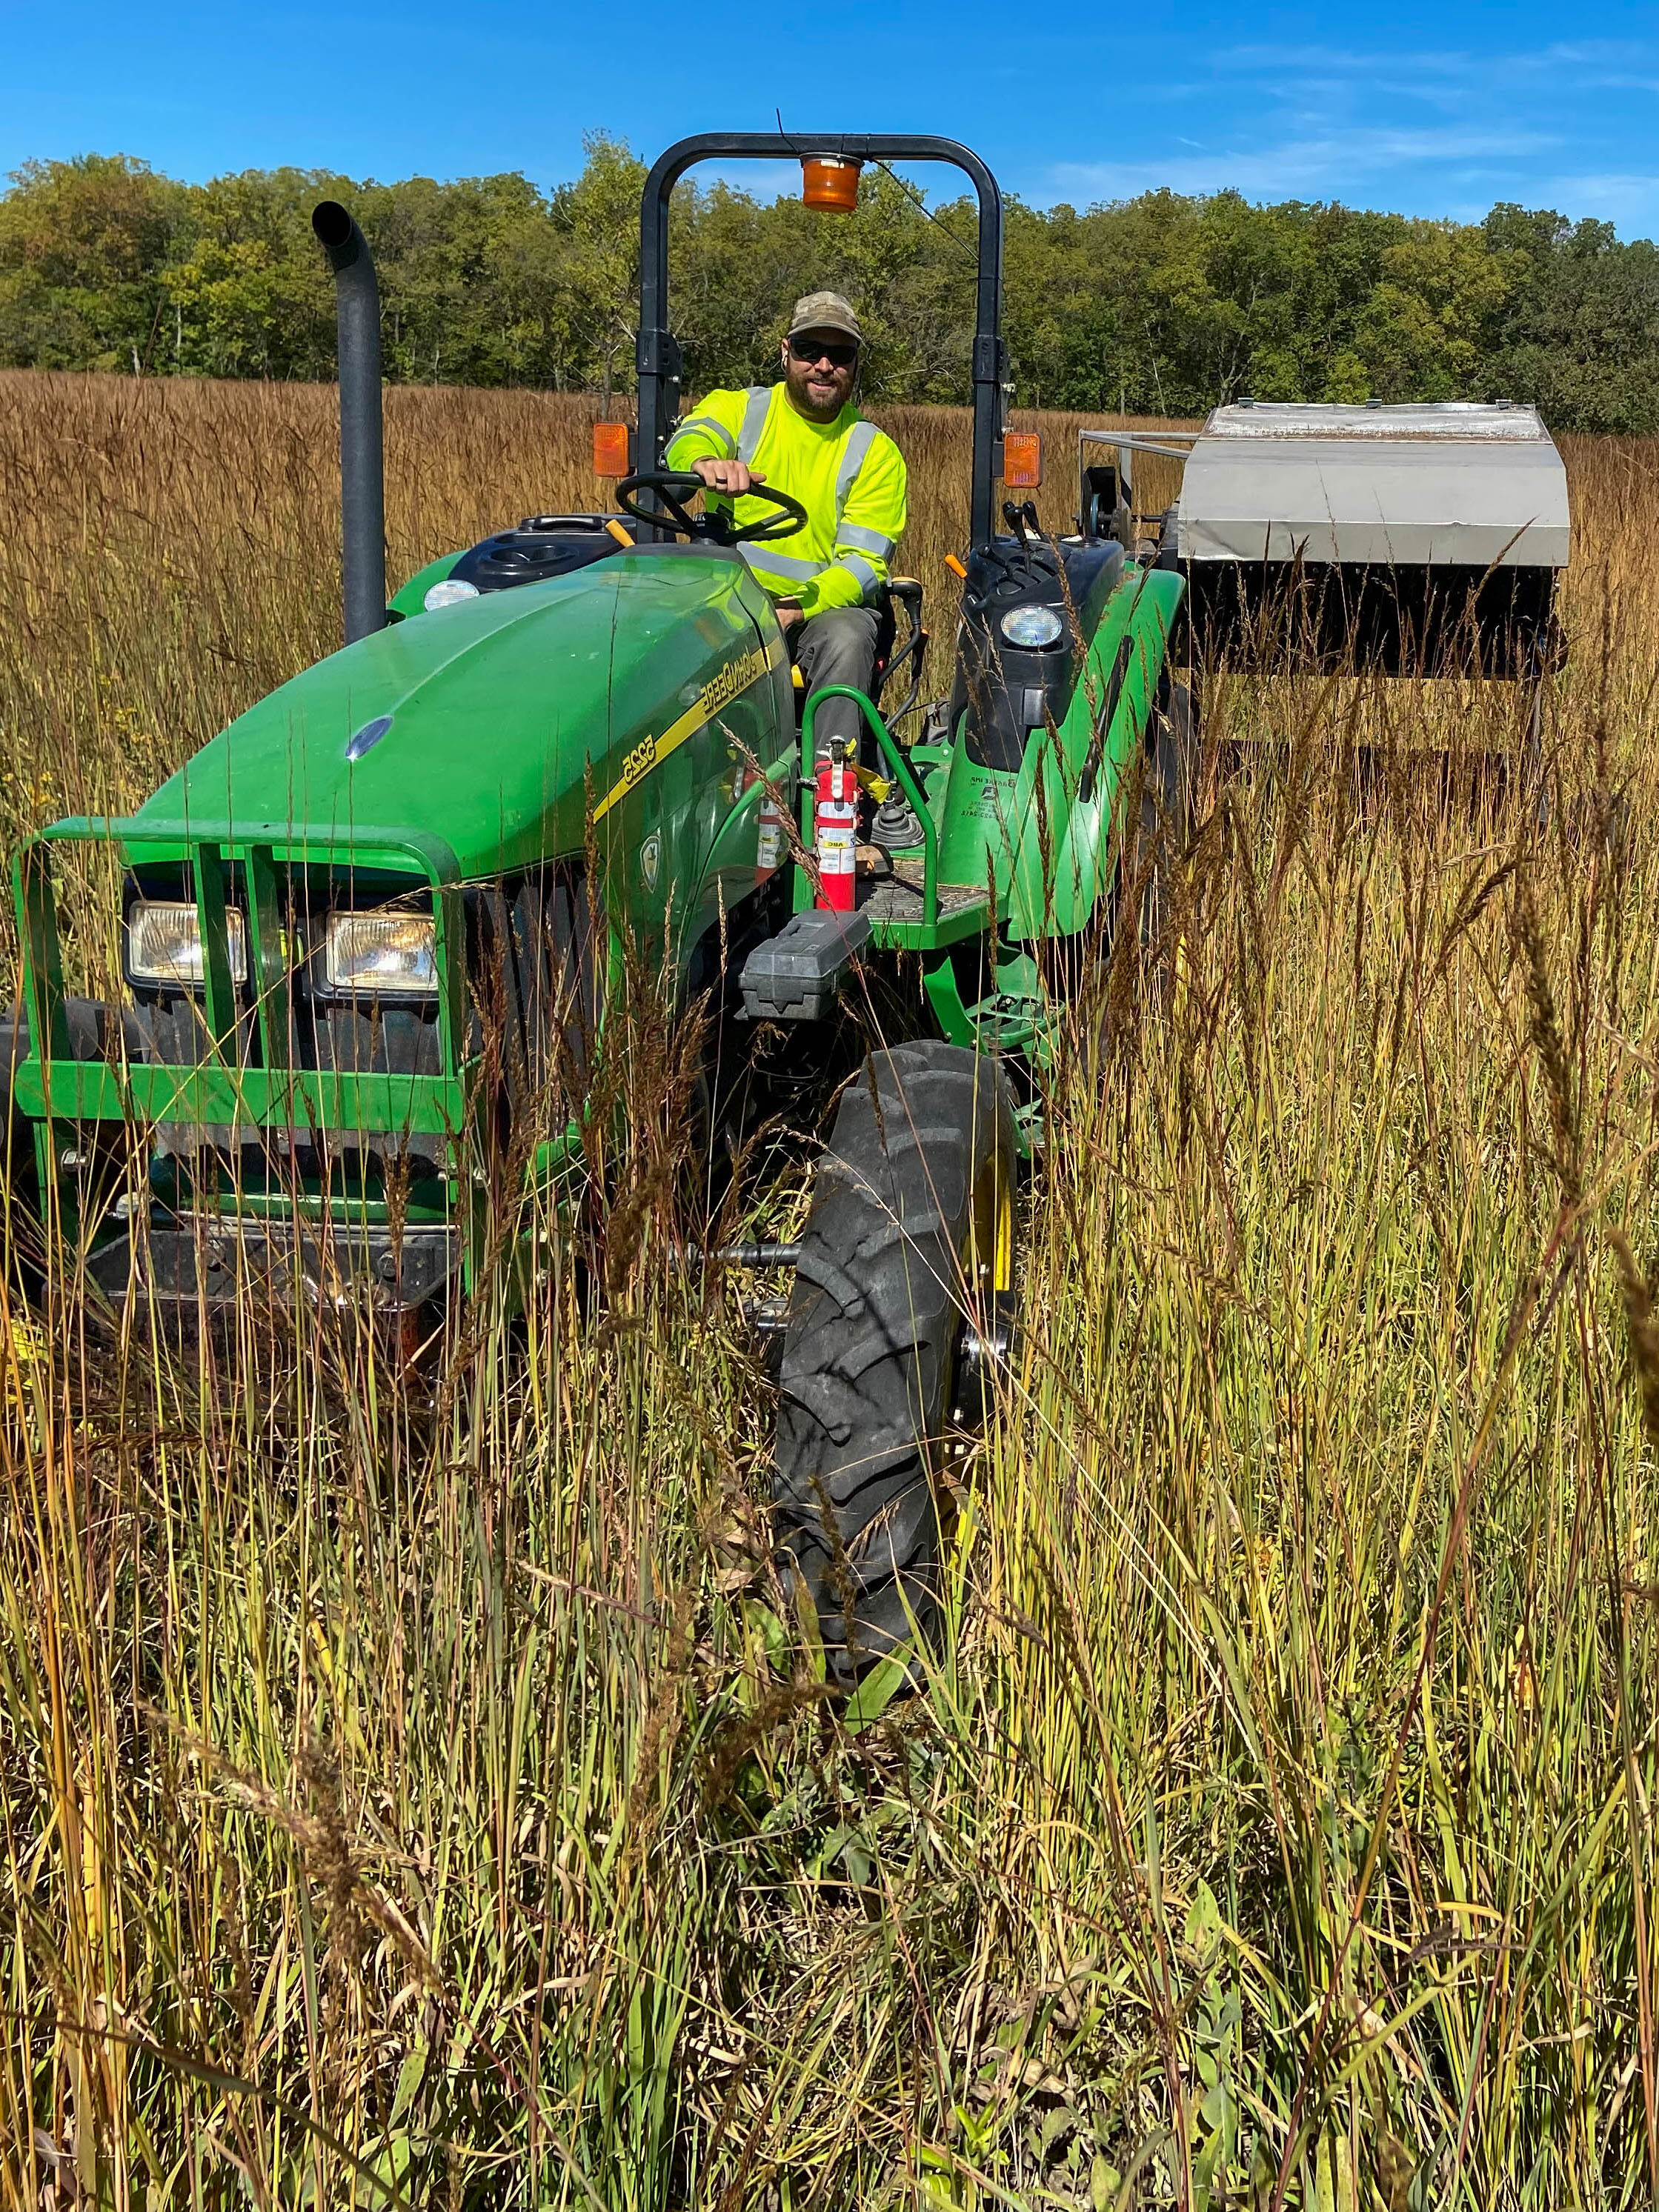 A roadside manager riding a tractor while working in prairie vegetation.